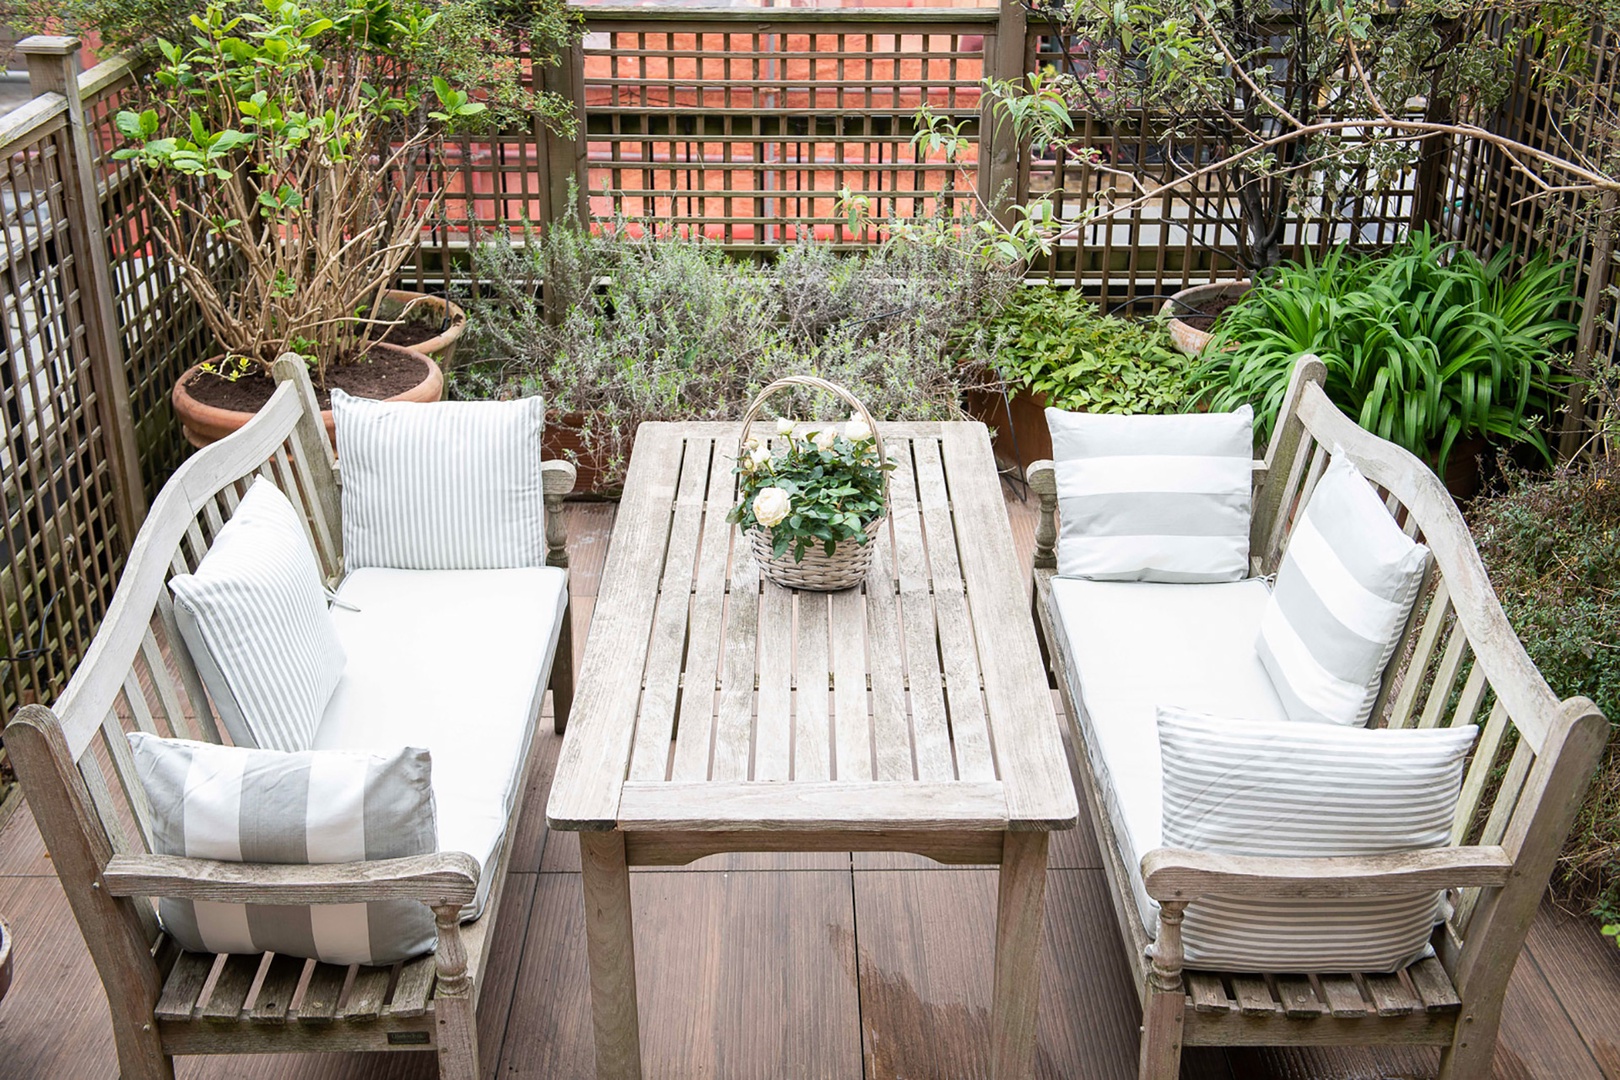 Relax on the terrace - a rare feature in Kensington!